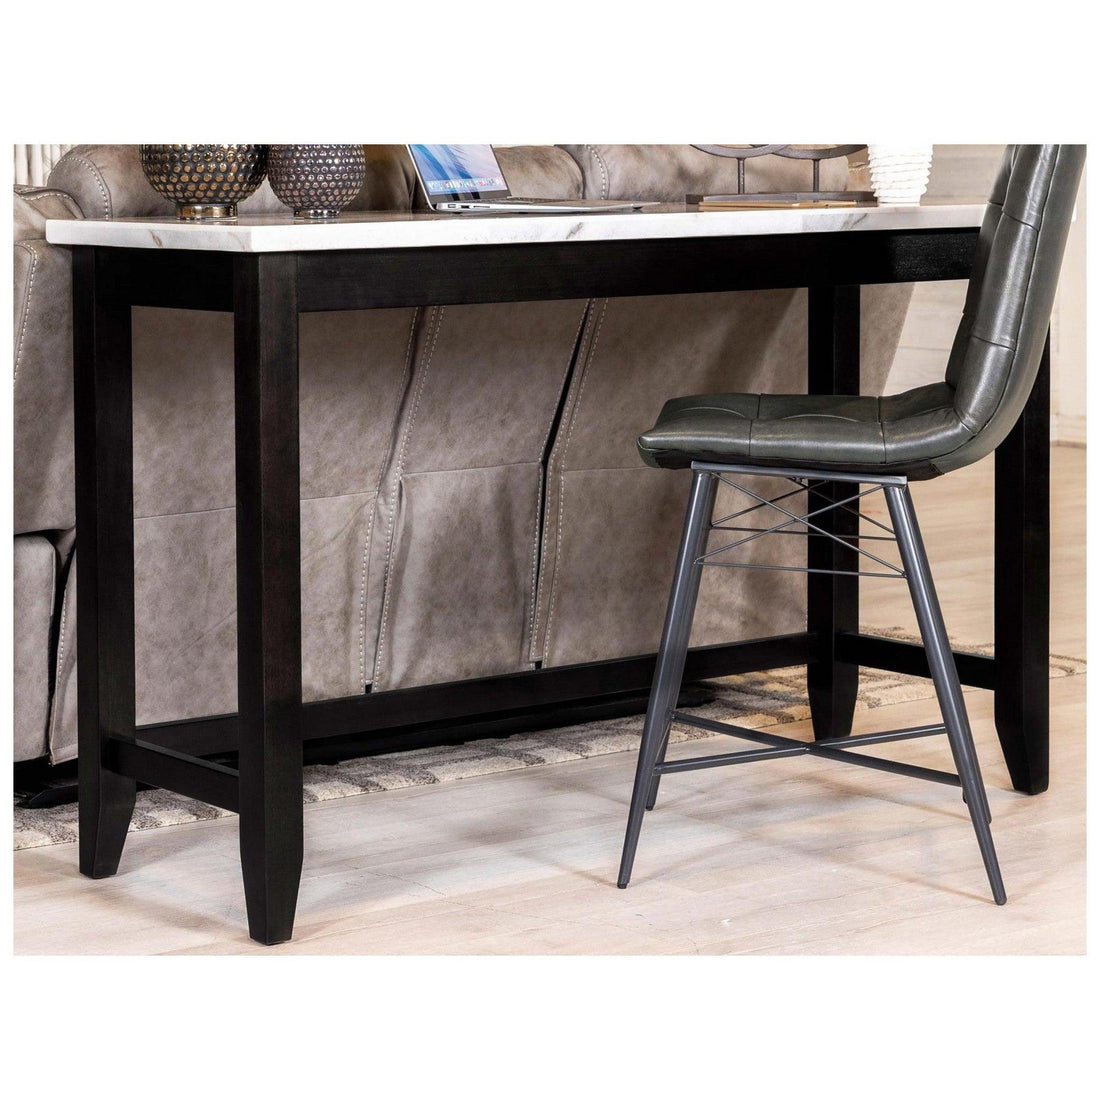 Toby Rectangular Marble Top Counter Height Table Espresso and White 115528